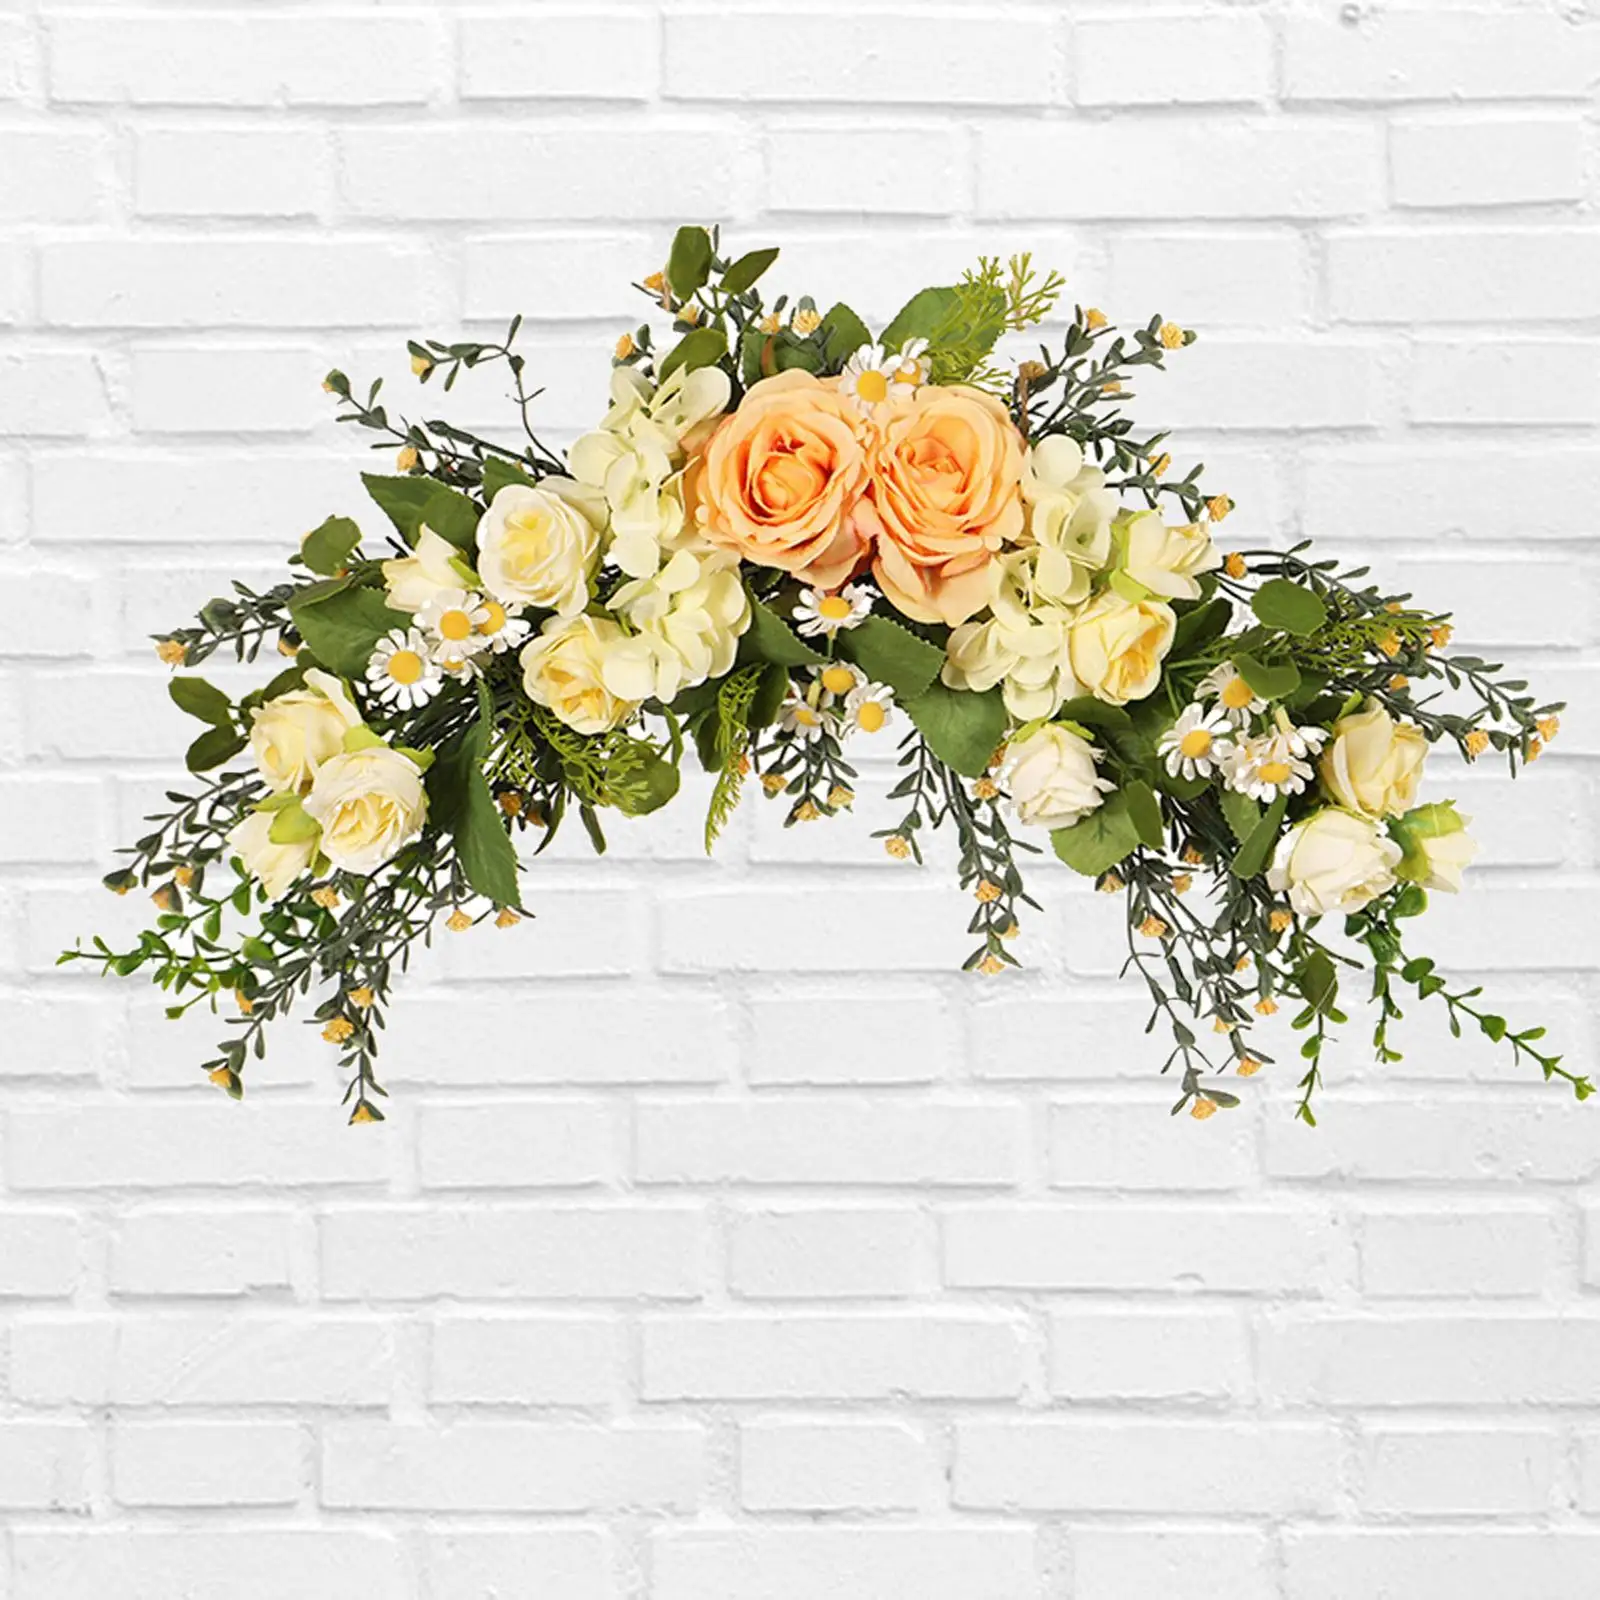 Artificial Floral Swag Decorative Swag Wedding Arch Flowers for Lintel Party